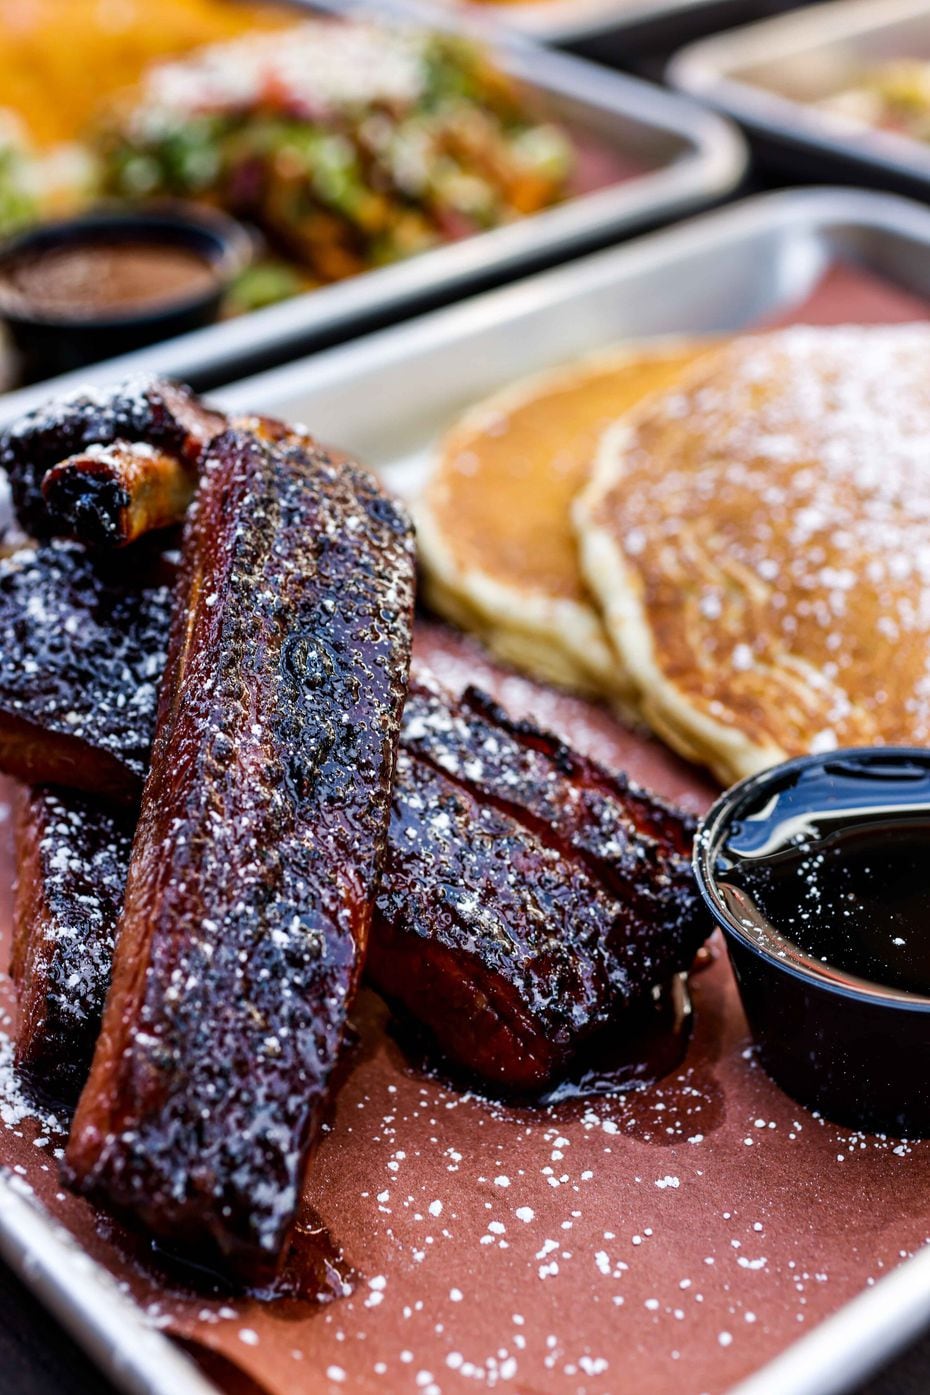 At brunchtime, Del Toro BBQ will serve pancakes with barbecue.